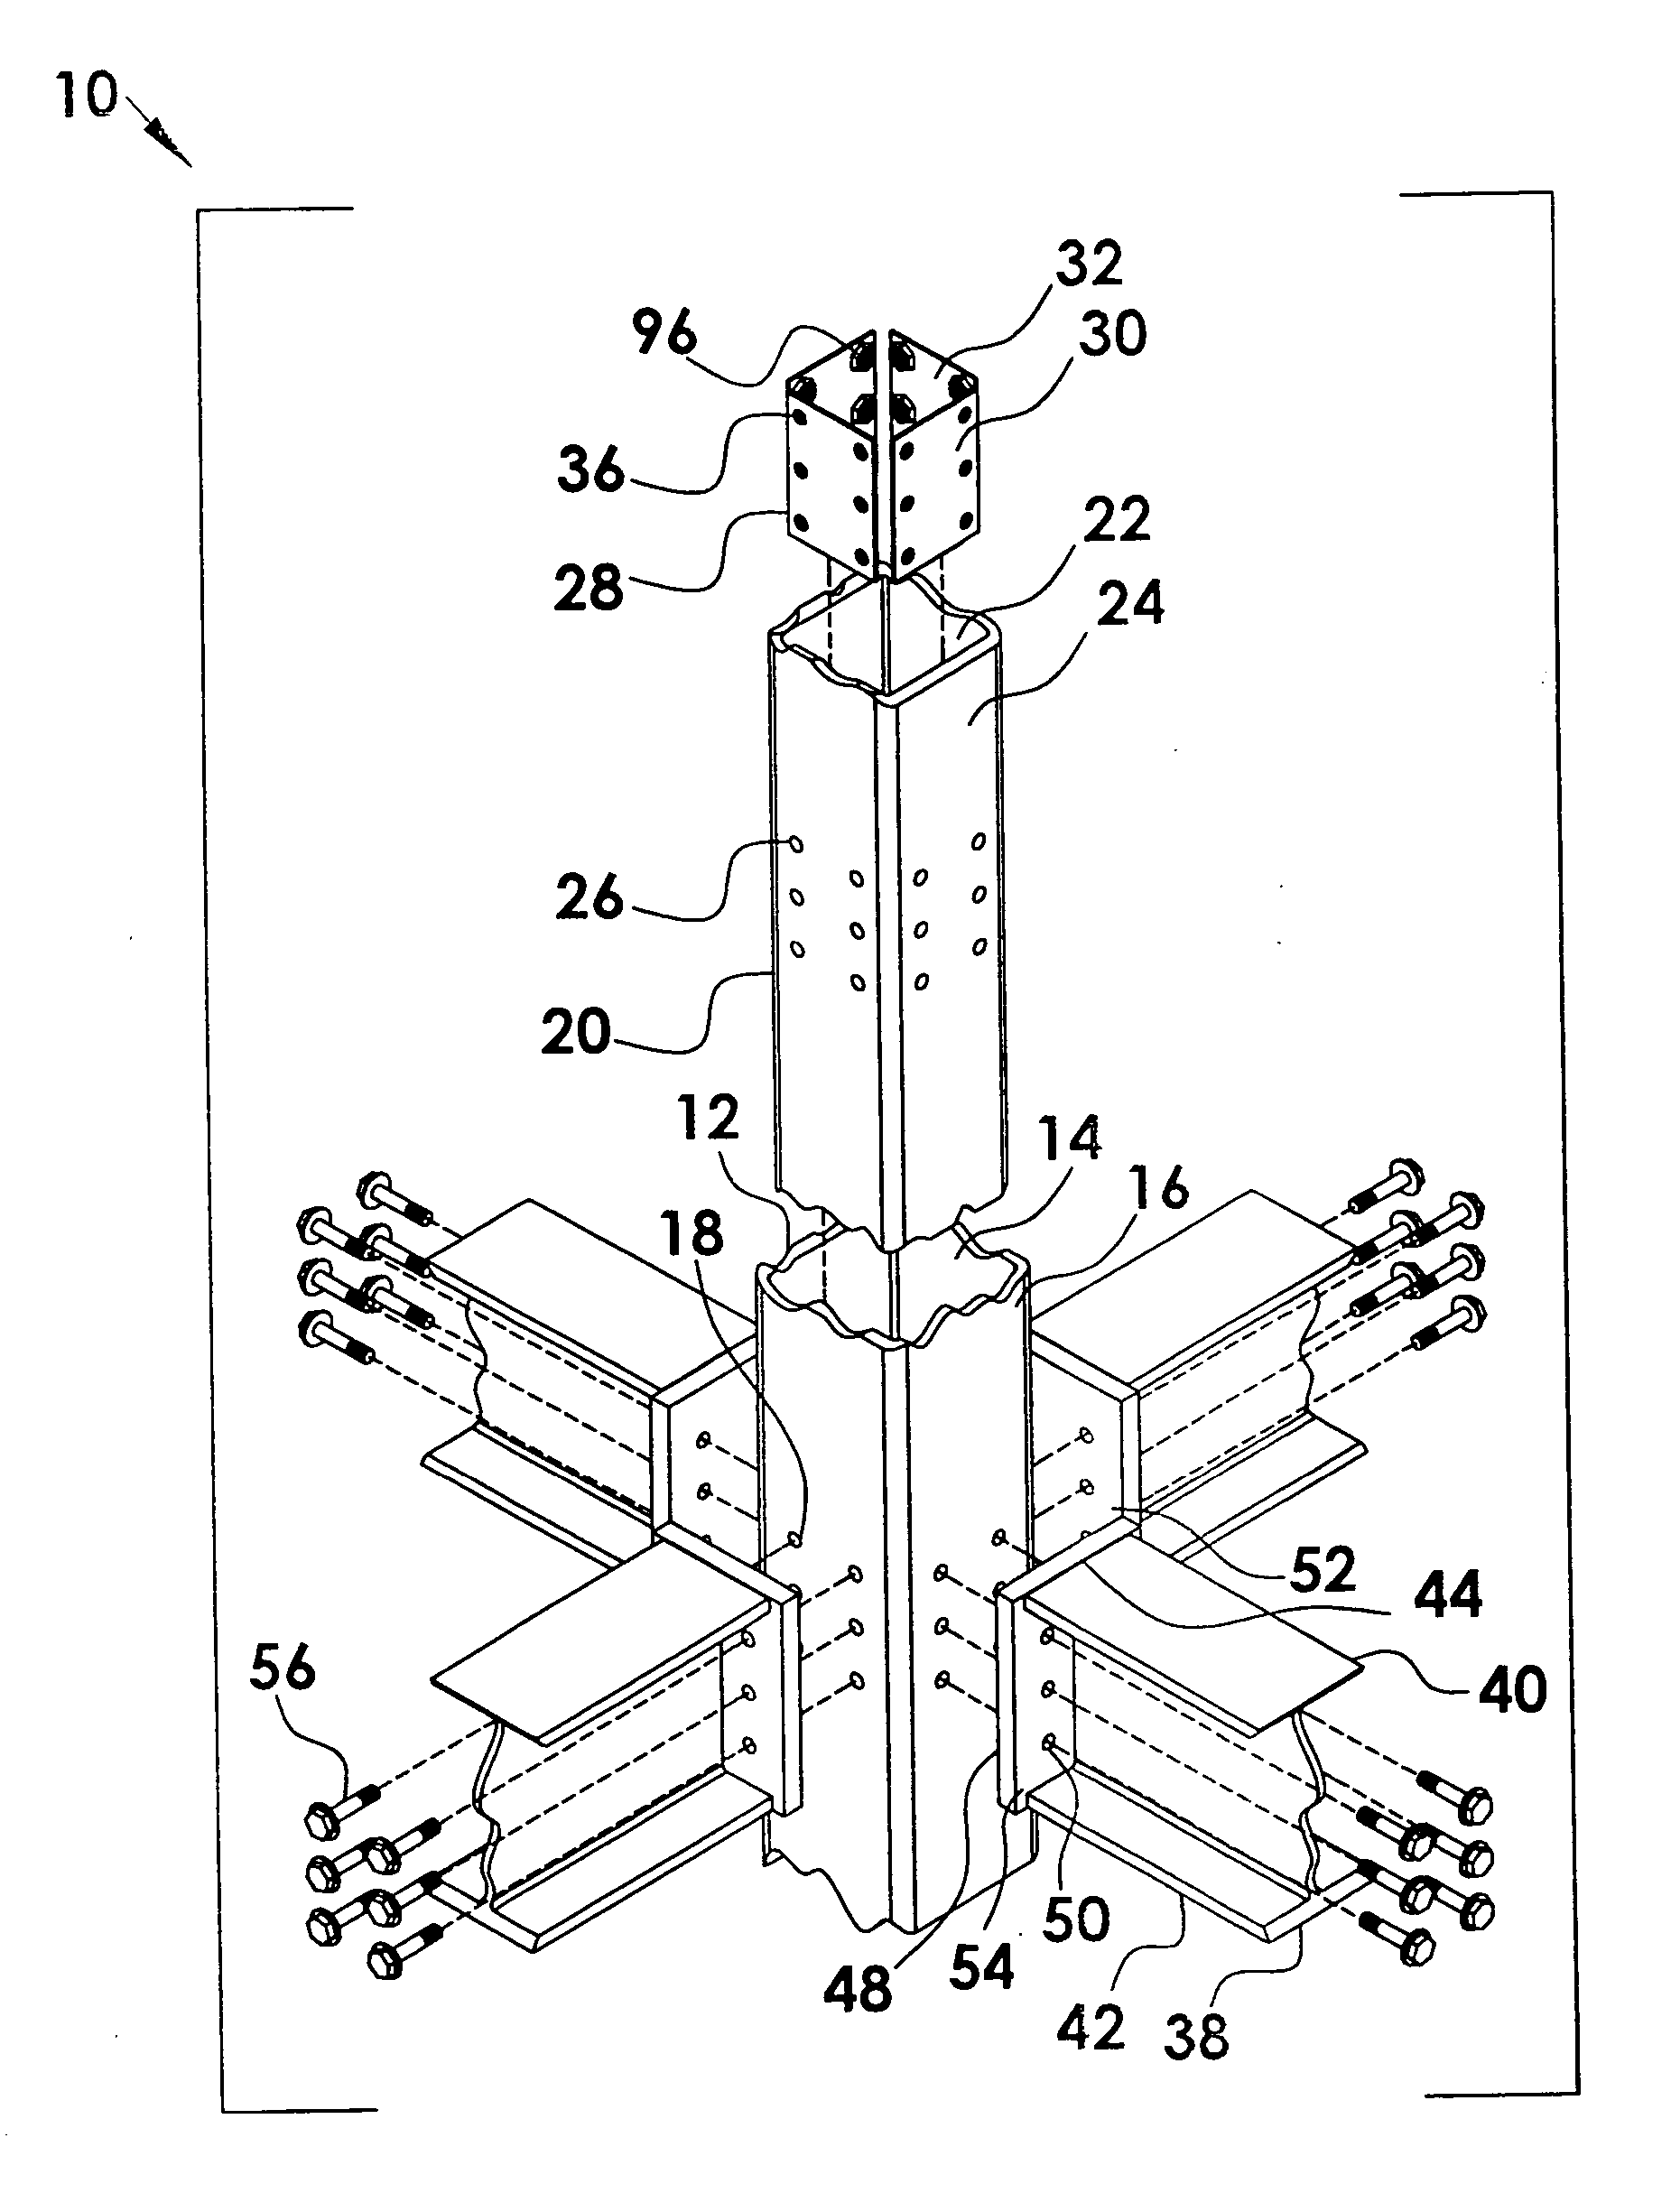 Moment-resistant building column insert system and method